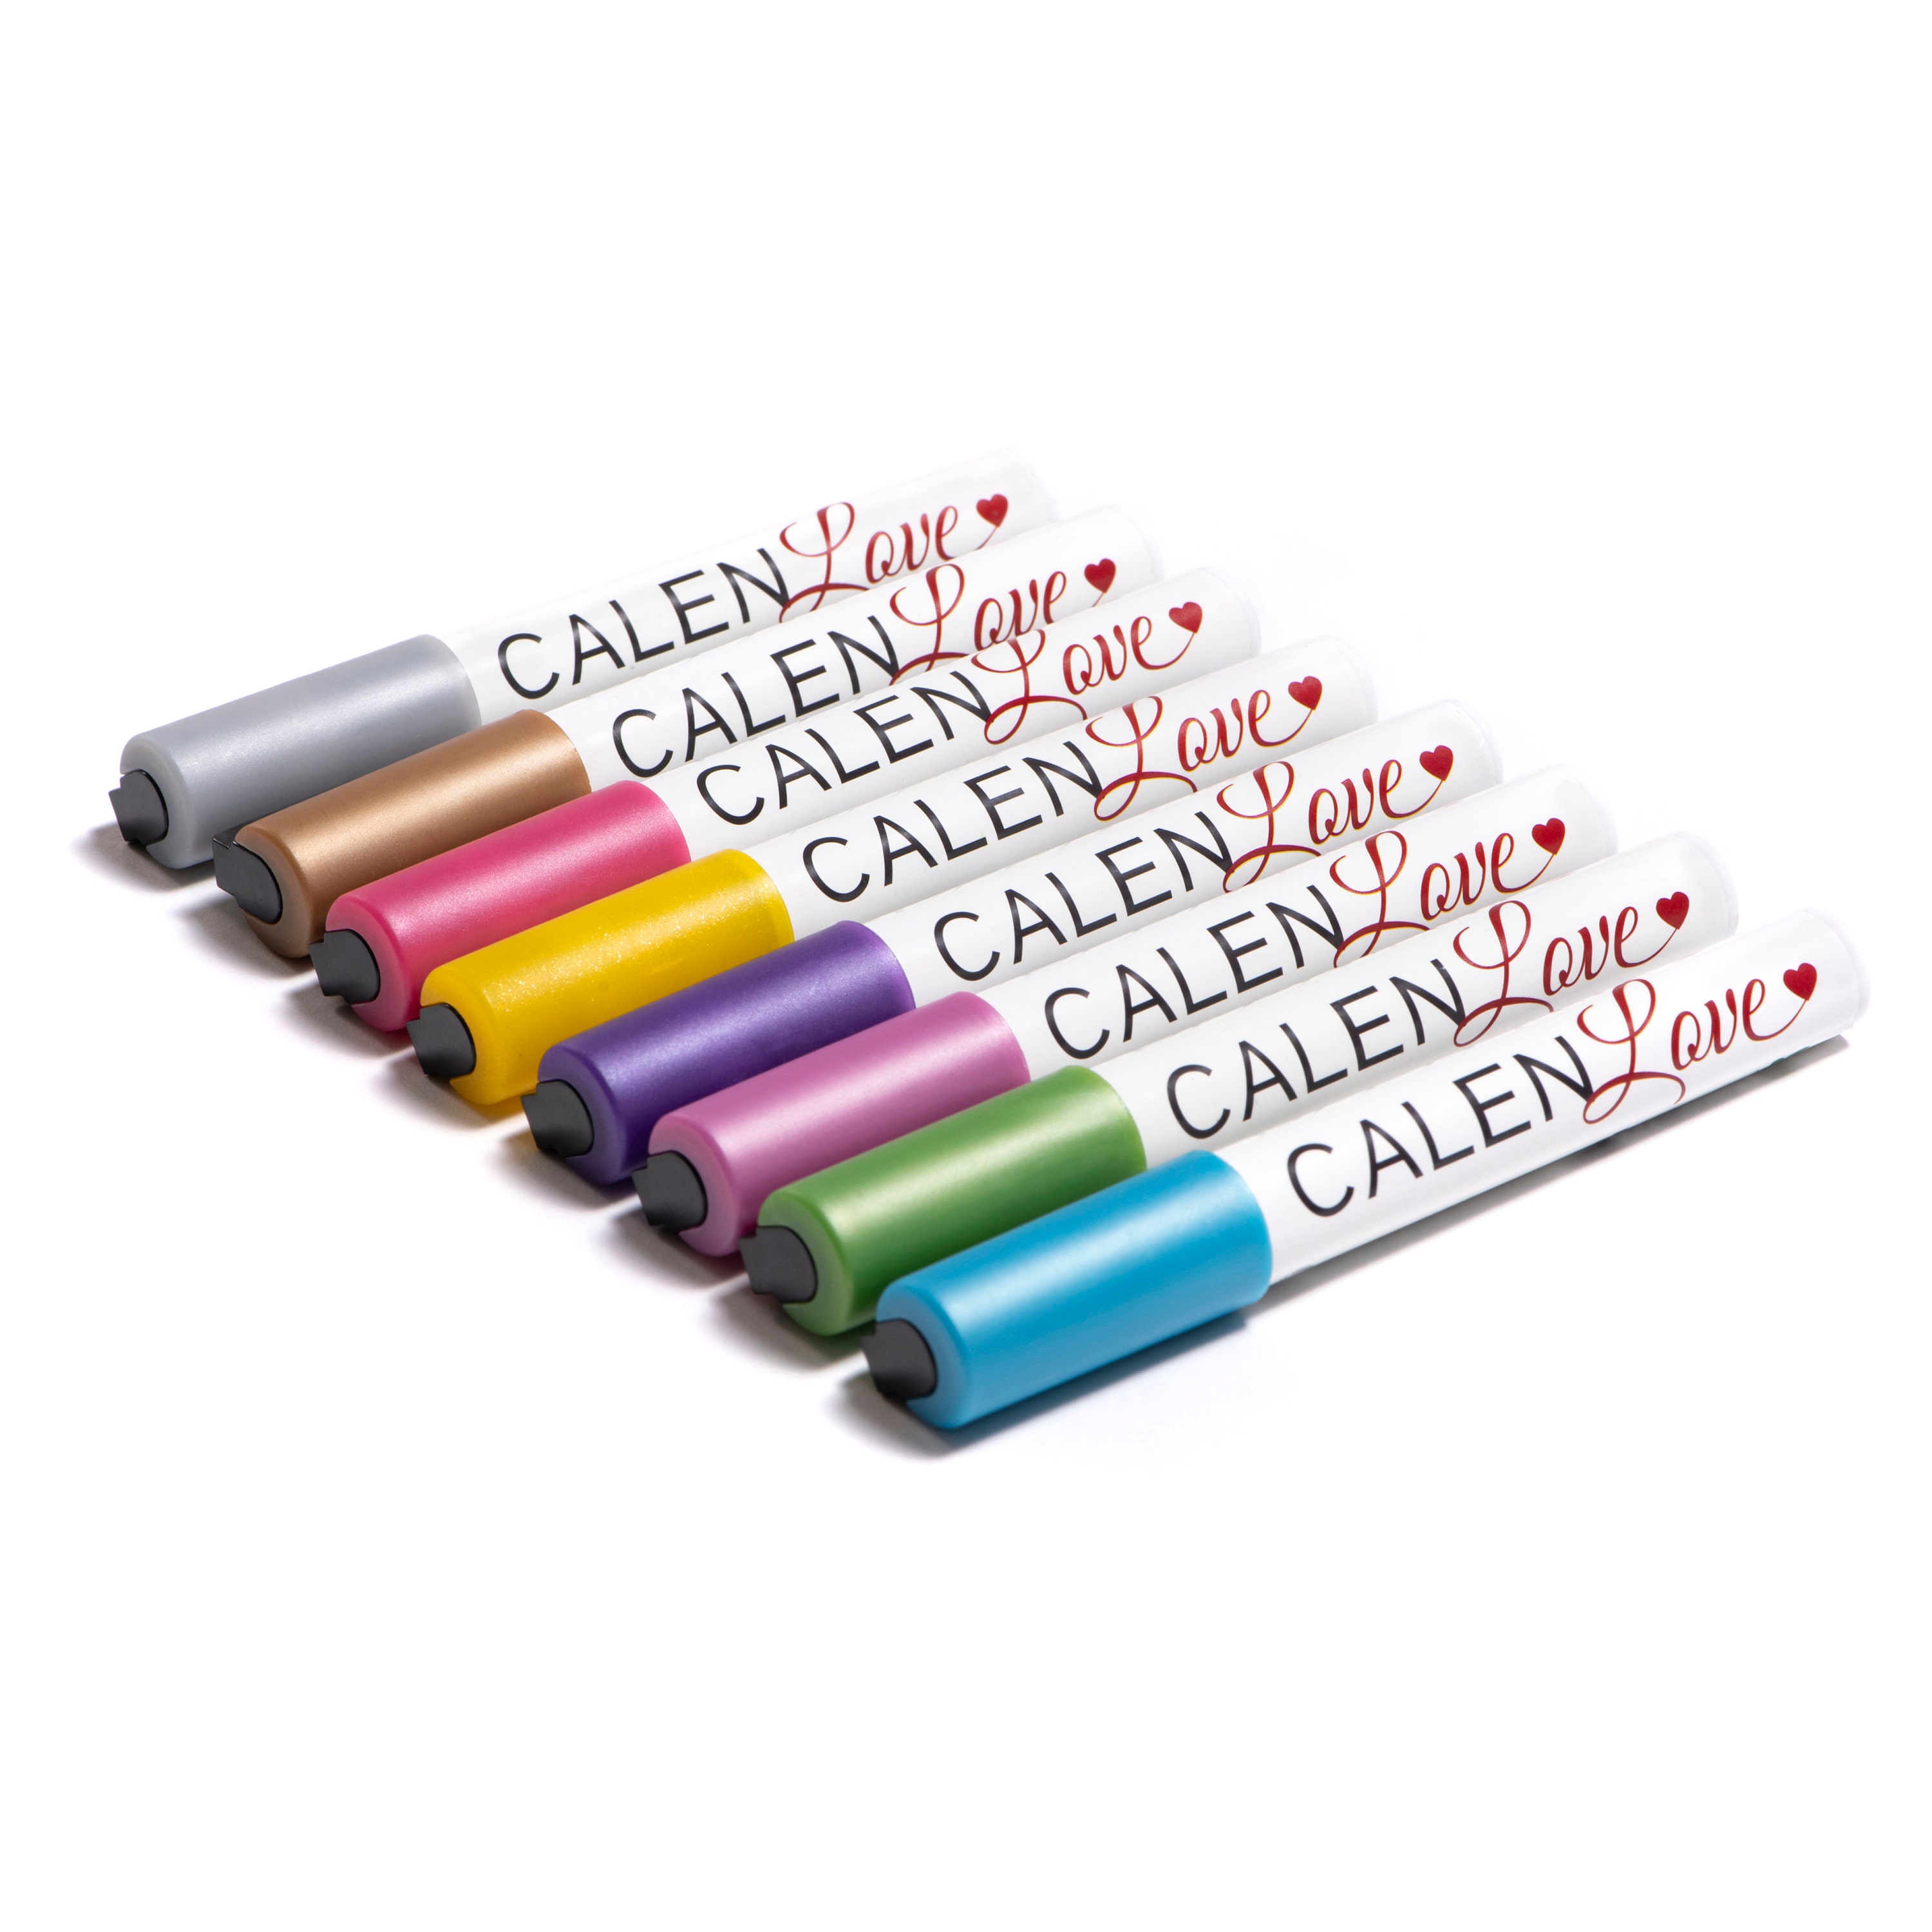 Dry Erase Markers 12 Assorted Colors, Chisel Tip - Set of 60